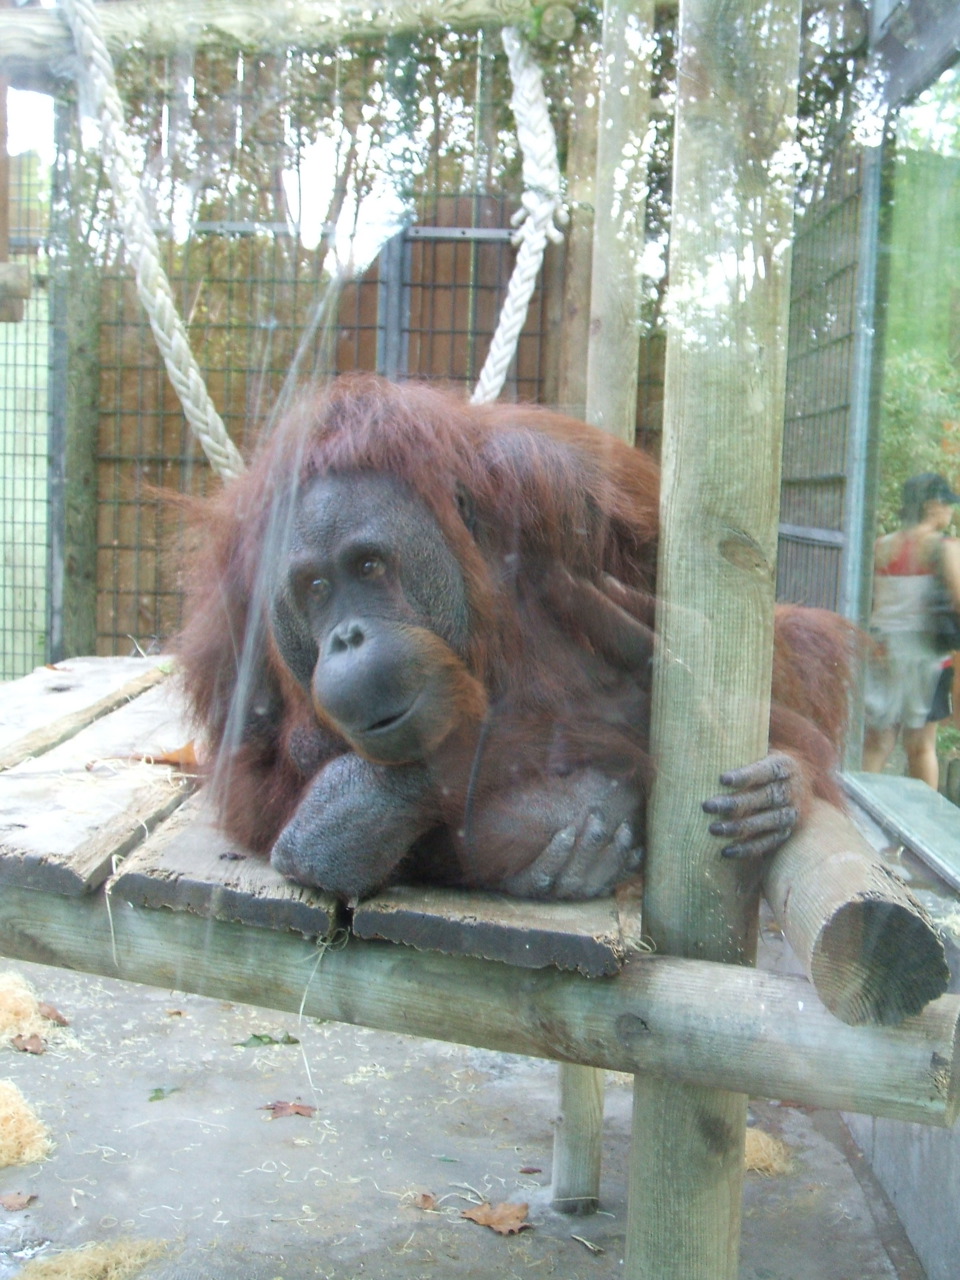 a very cute looking oranguel laying down in an enclosure